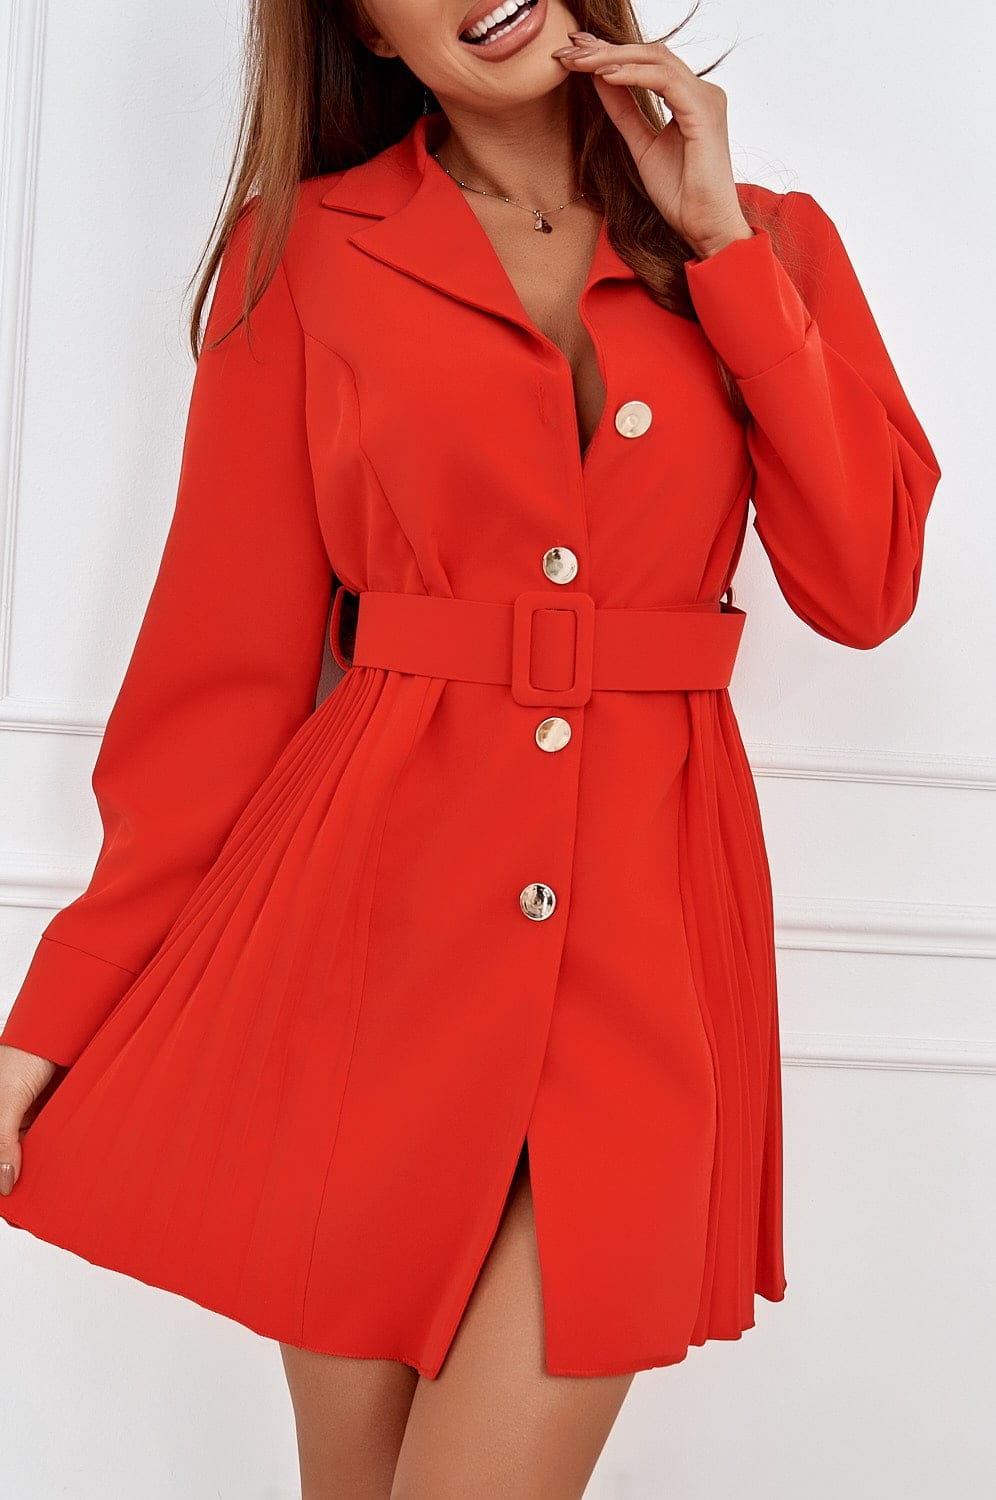 Red zip-up dress with a belt